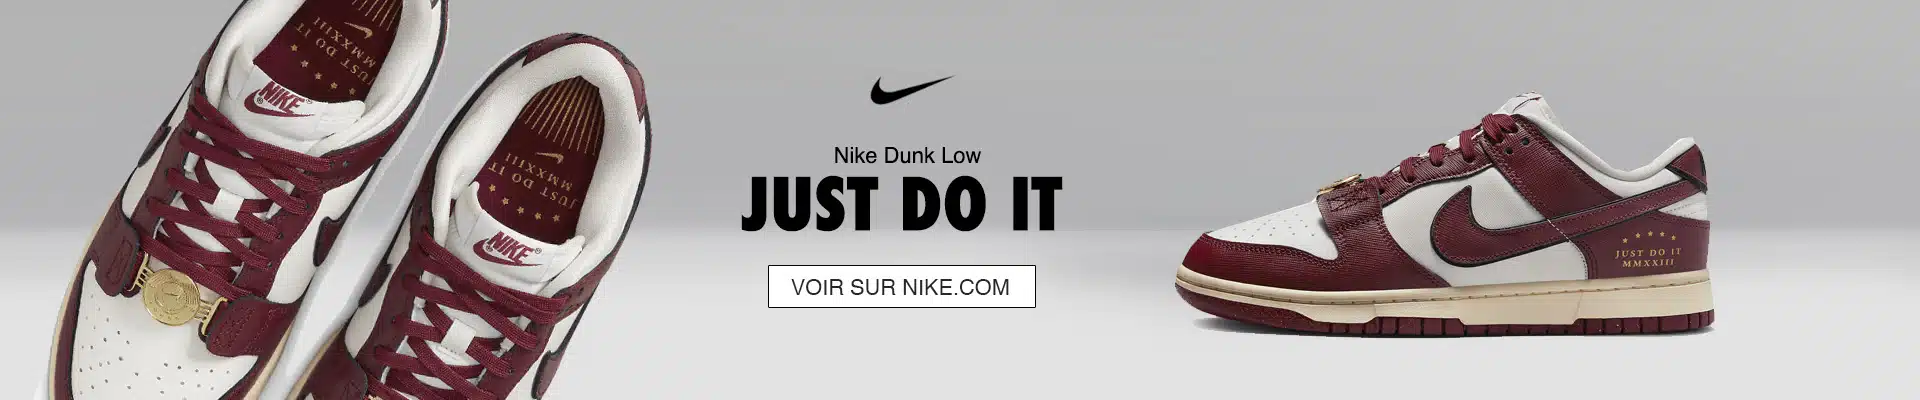 nike collection Dunk Low Just do it